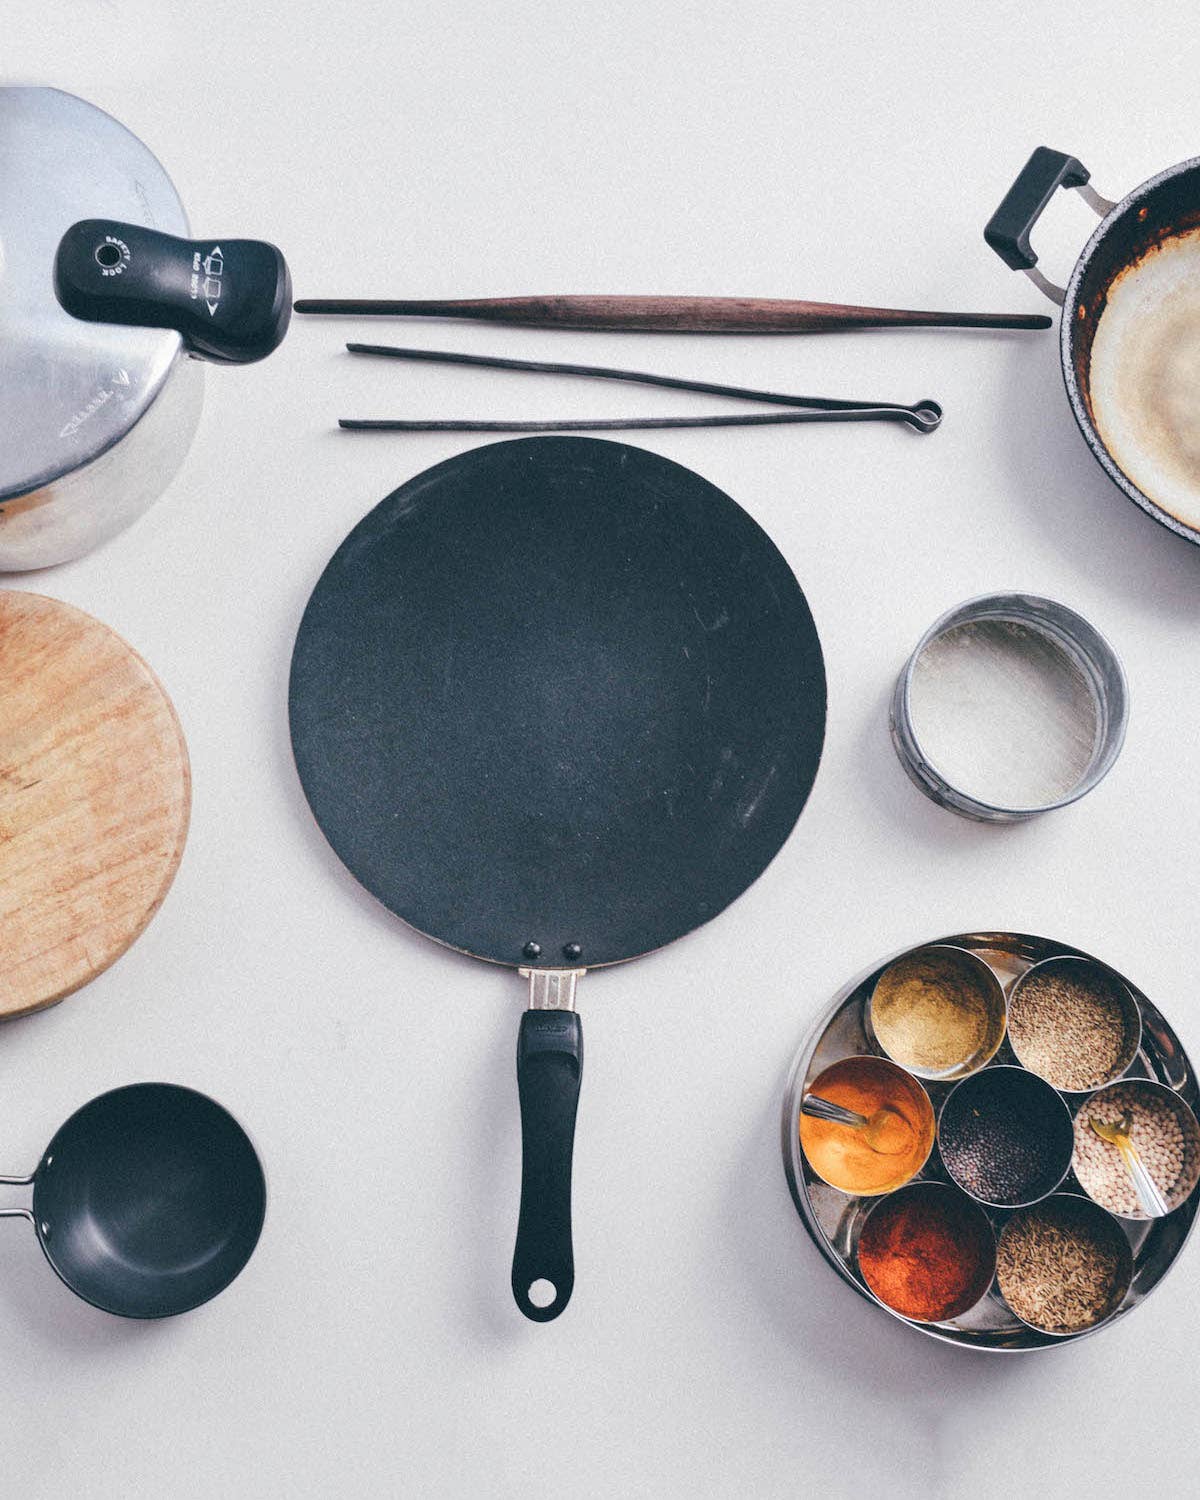 10 Essential Indian Cooking Tools for Making Perfect Flatbreads, Fritters, and Curries